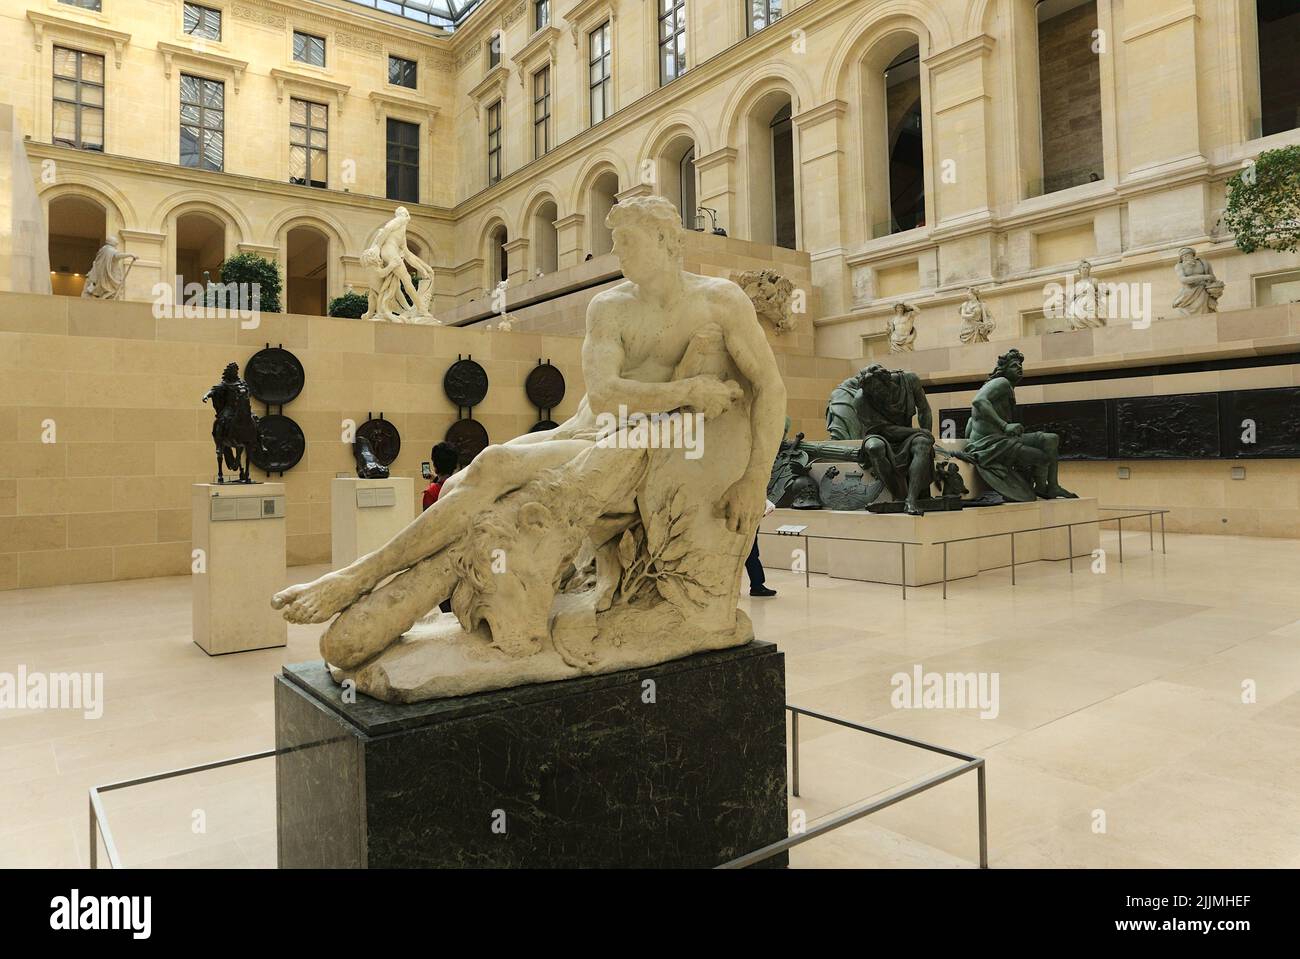 The Marble sculpture Gallic Hercules in the Cour Marly courtyard in Richelieu Wing of Louvre Museum in Paris, France Stock Photo